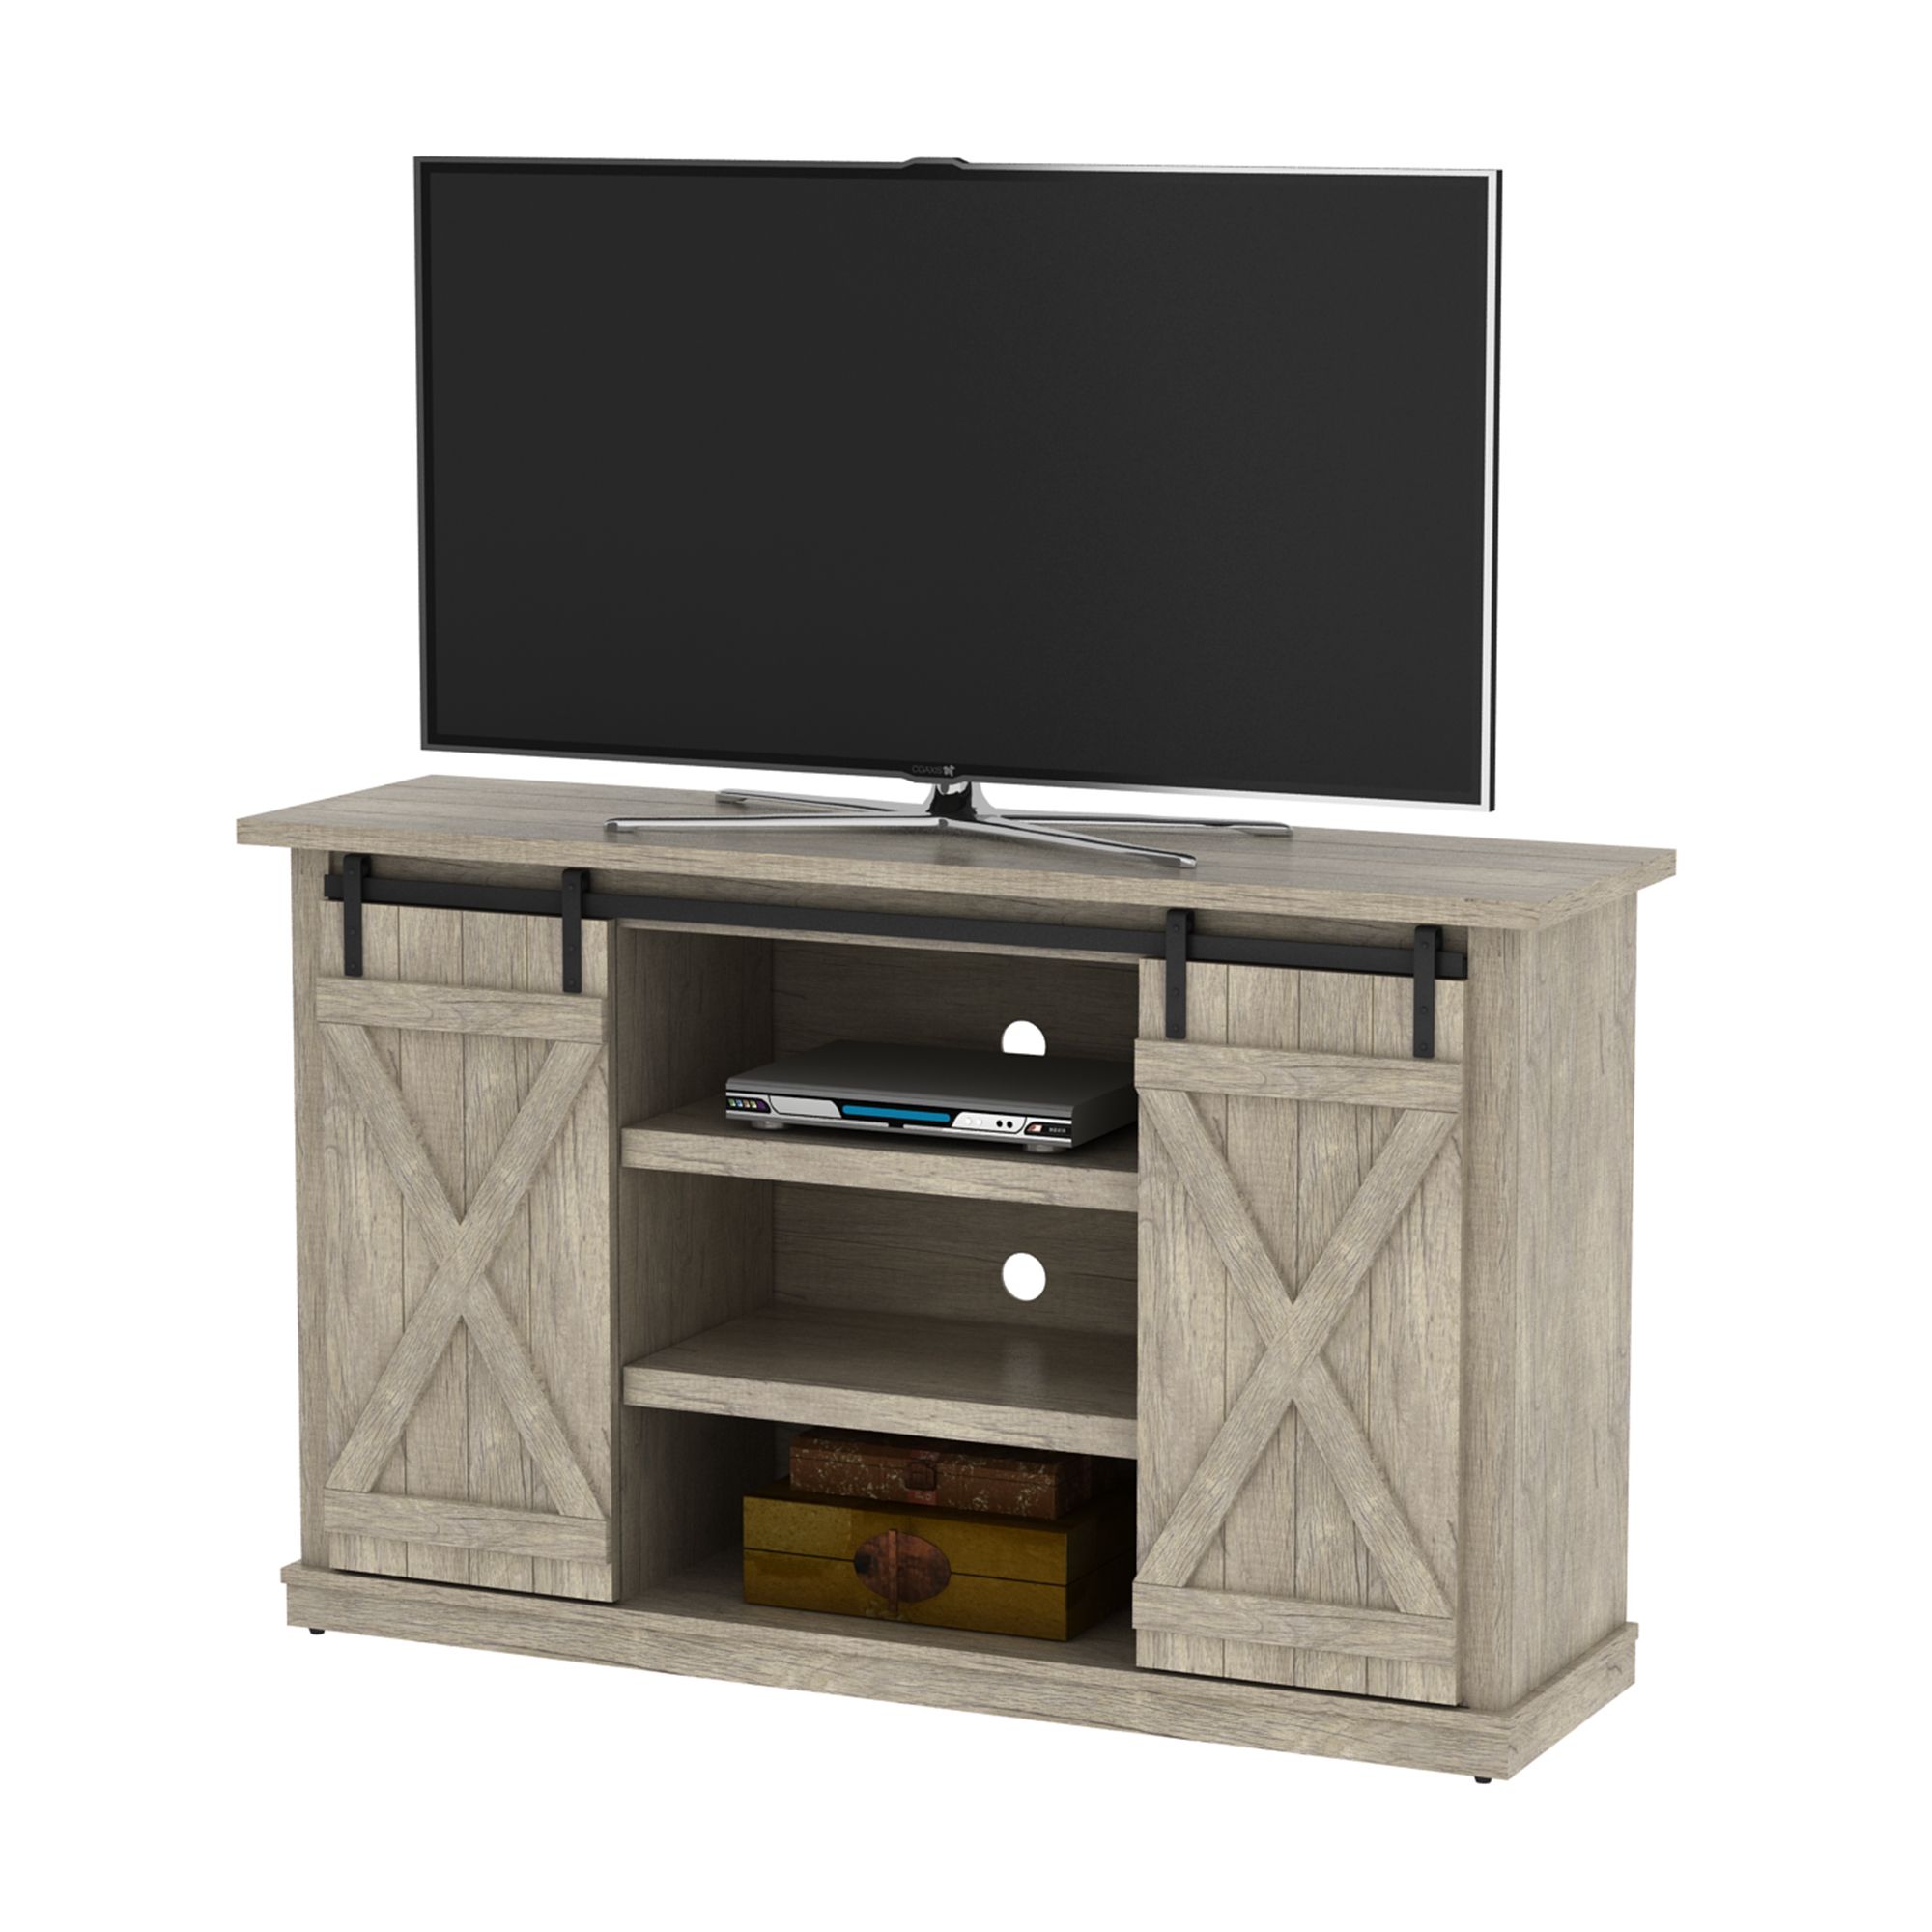 Cottonwood Tv Stand For Tvs Up To 60 Inches With Sliding Pertaining To Farmhouse Sliding Barn Door Tv Stands For 70 Inch Flat Screen (View 5 of 15)